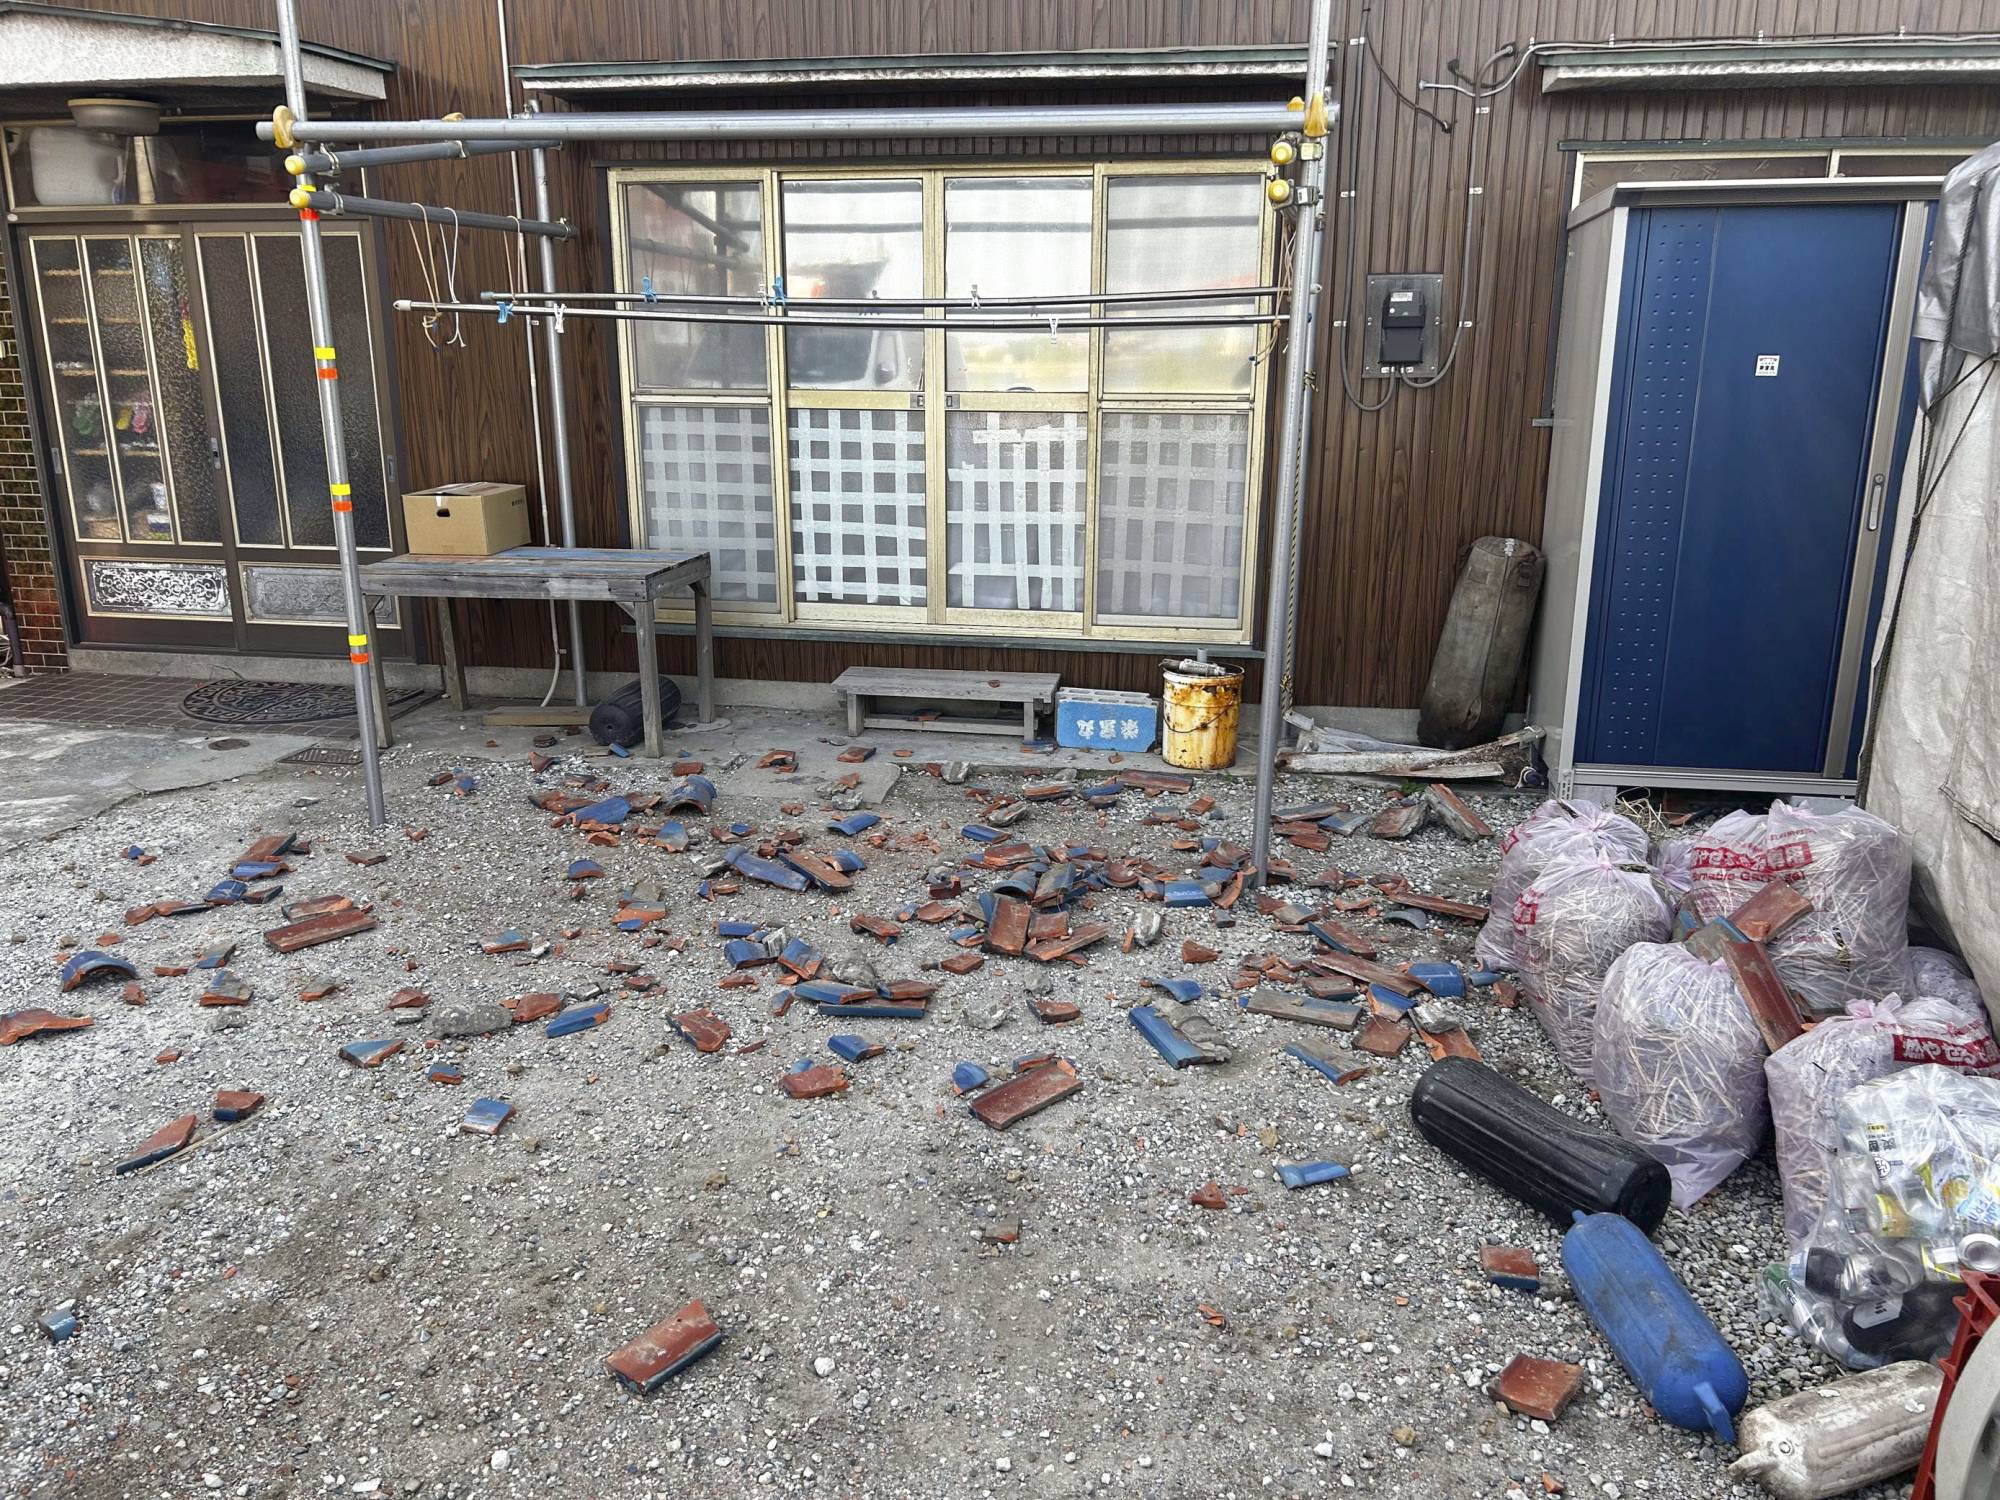 Fallen roof tiles are scattered on the ground outside a house in Kisarazu, Chiba Prefecture, after a powerful quake hit eastern Japan on Thursday morning. | KYODO